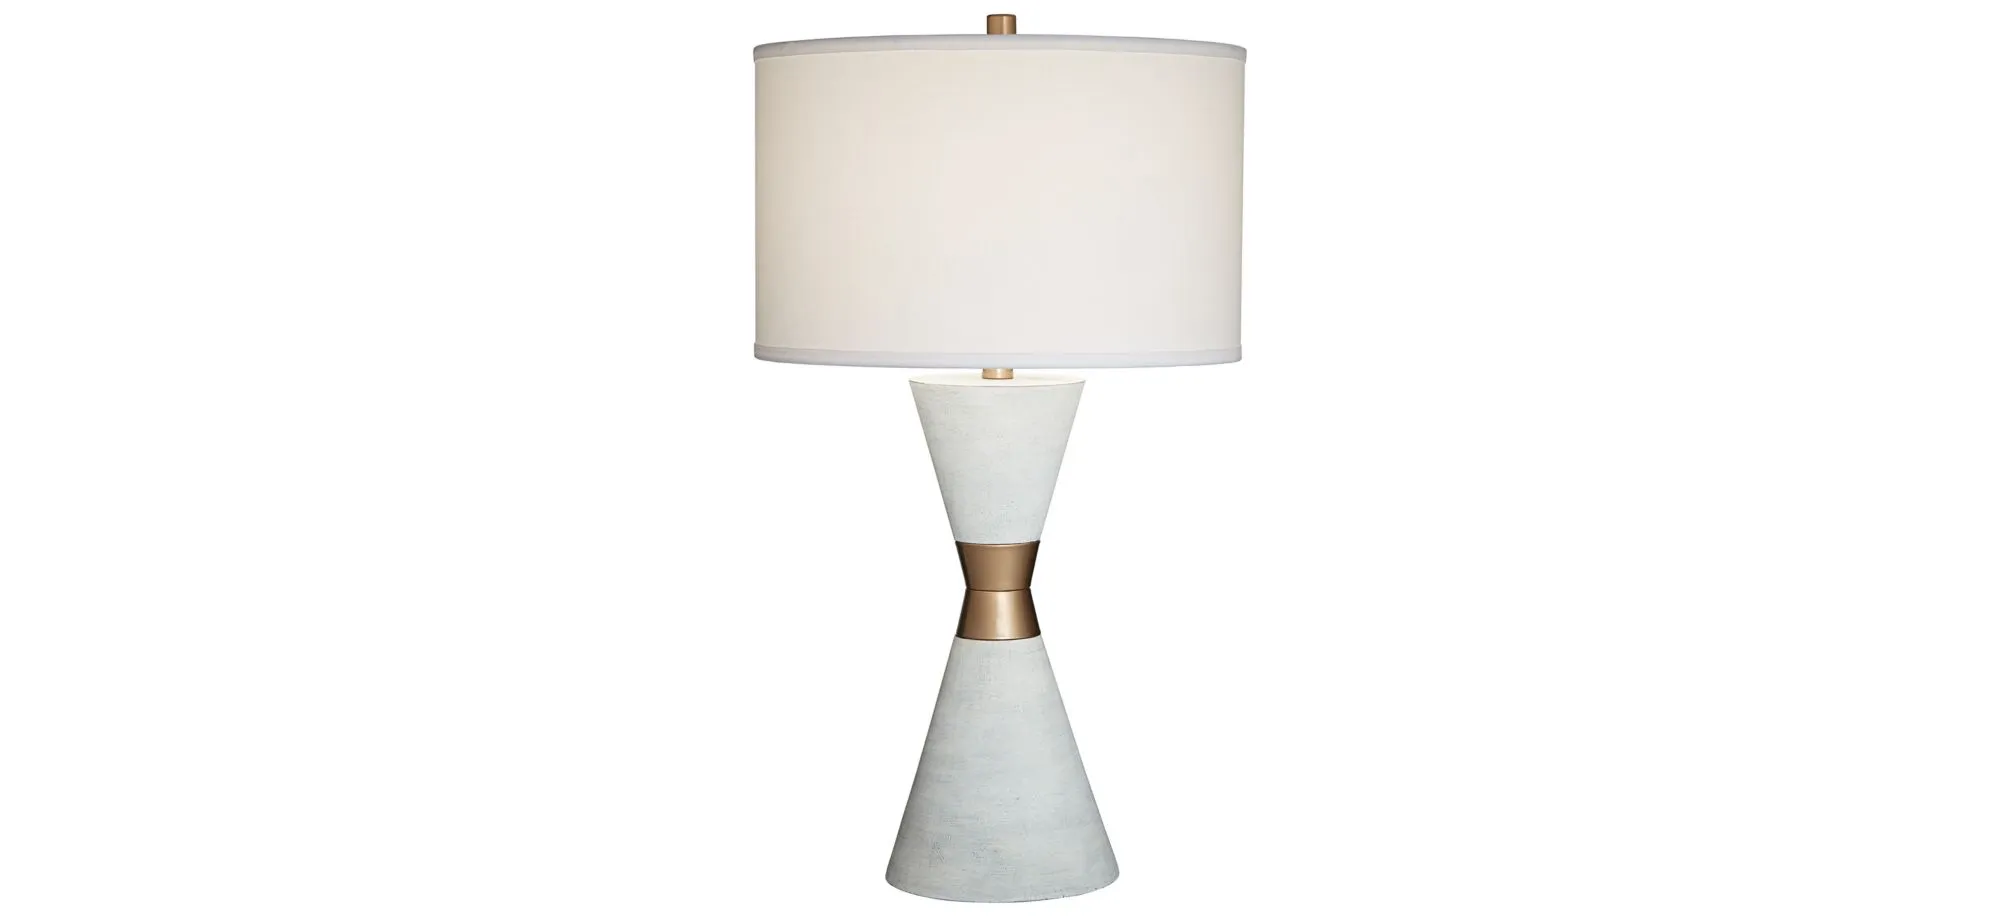 Kingstown Table Lamp in White by Pacific Coast